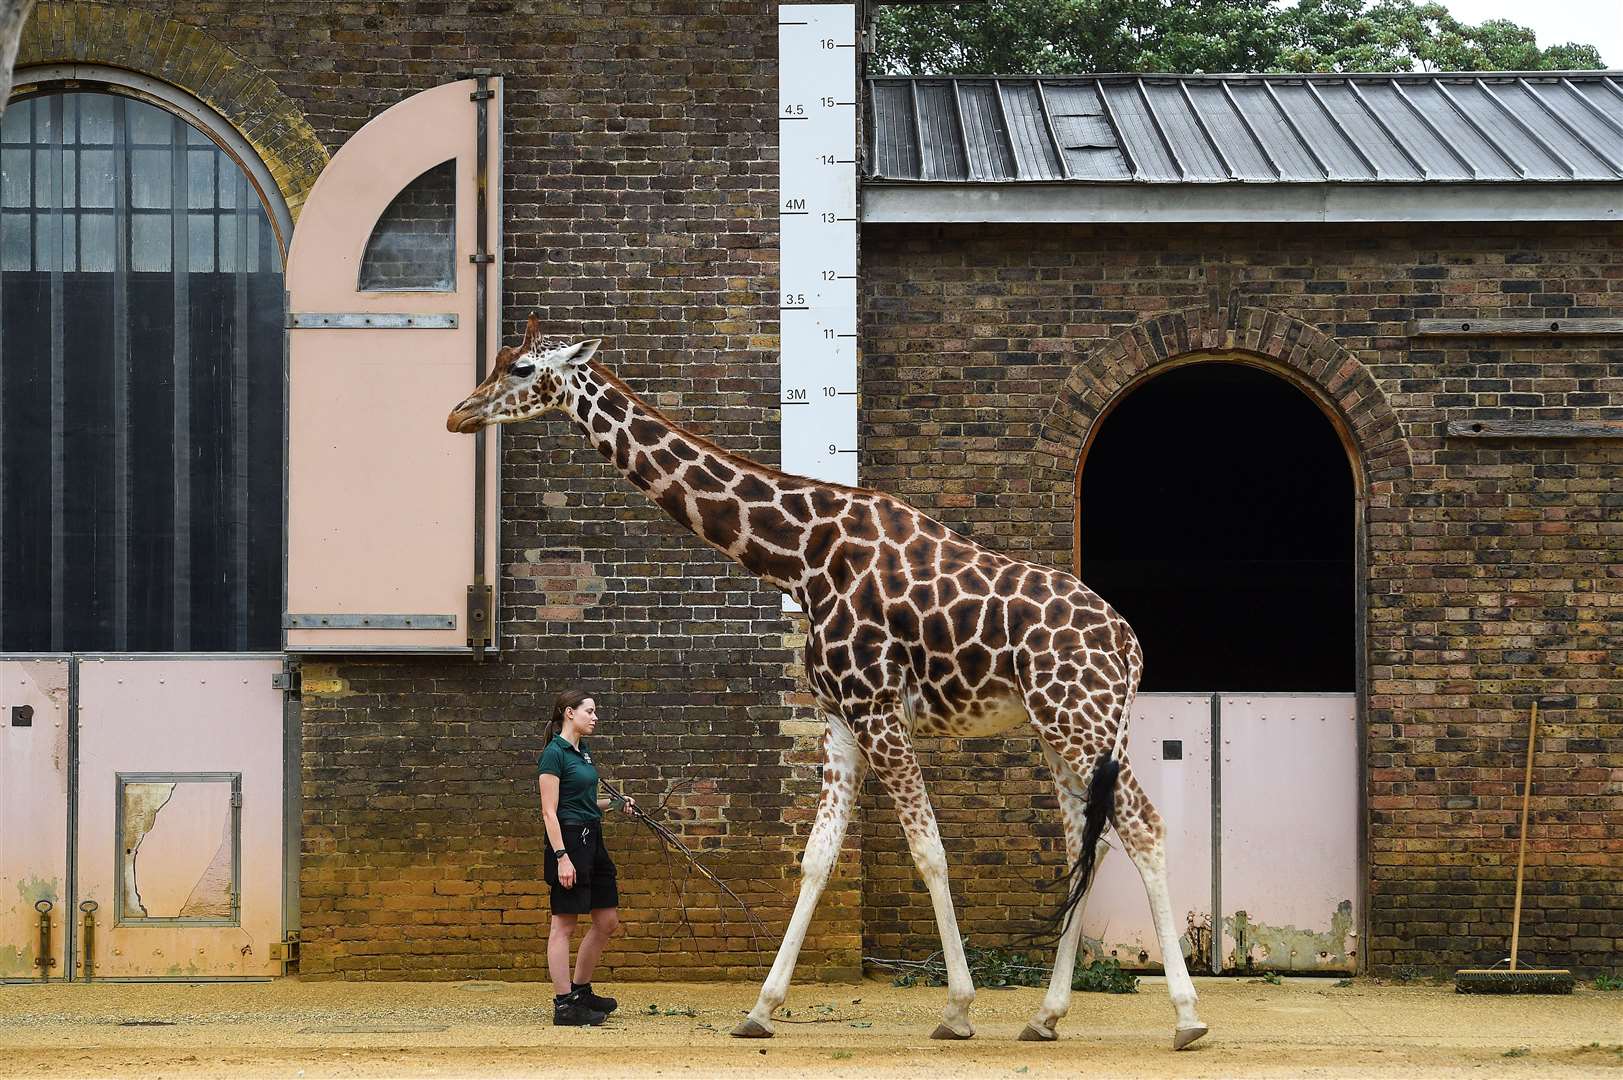 Keeper Maggie measures a giraffe during the annual weigh-in at ZSL London Zoo (Kirsty O’Connor/PA)